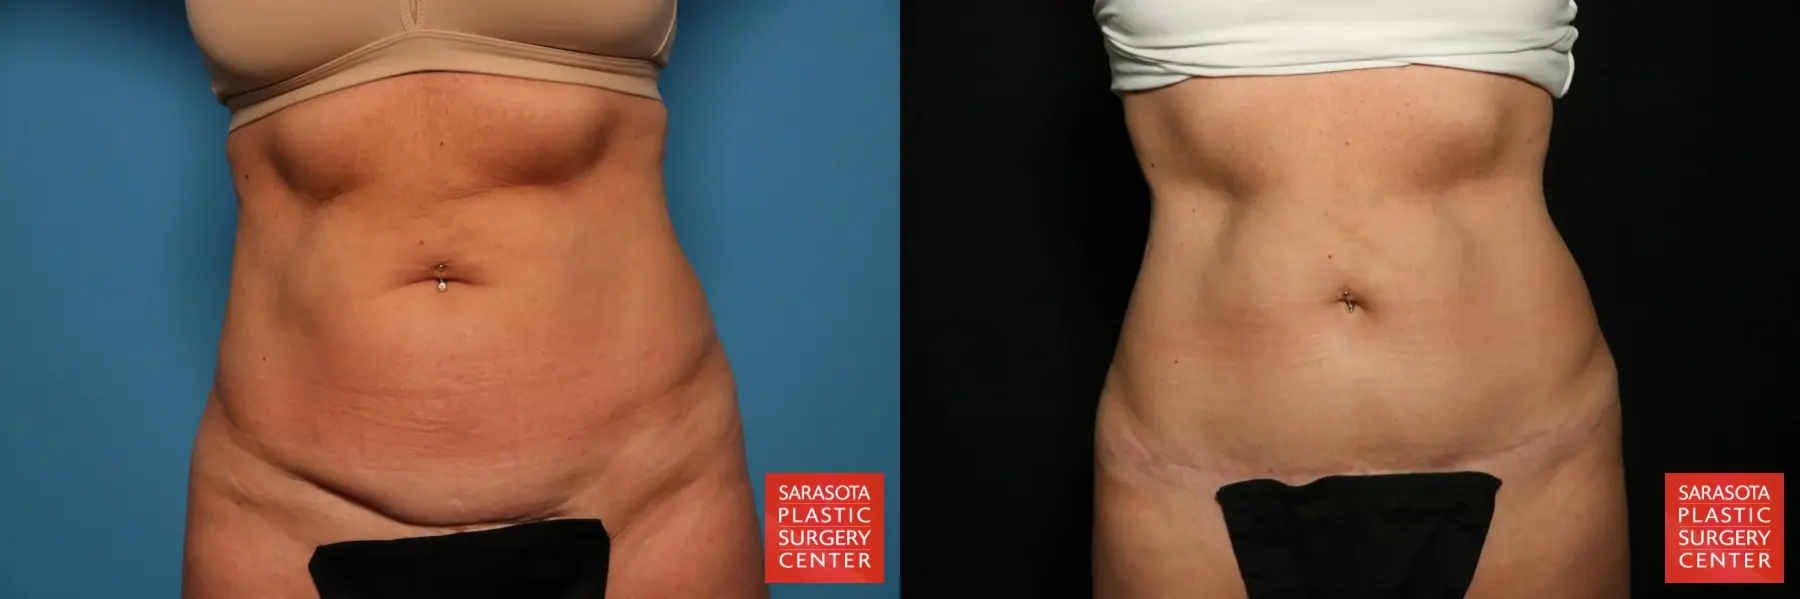 Mini Tummy Tuck: Patient 1 - Before and After 1